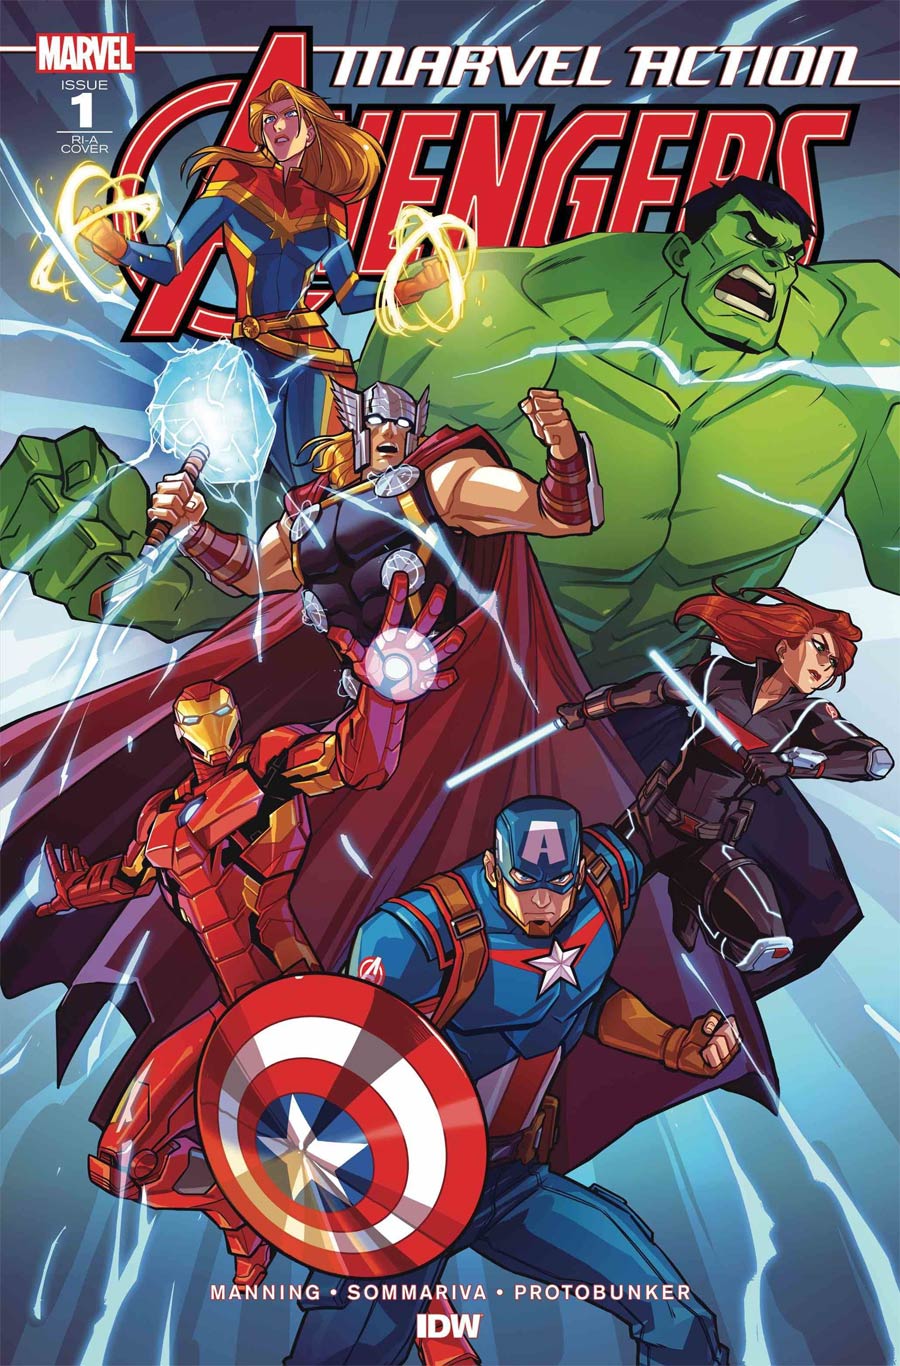 Marvel Action Avengers Vol 2 #1 Cover B Incentive Jacob Edgar Variant Cover